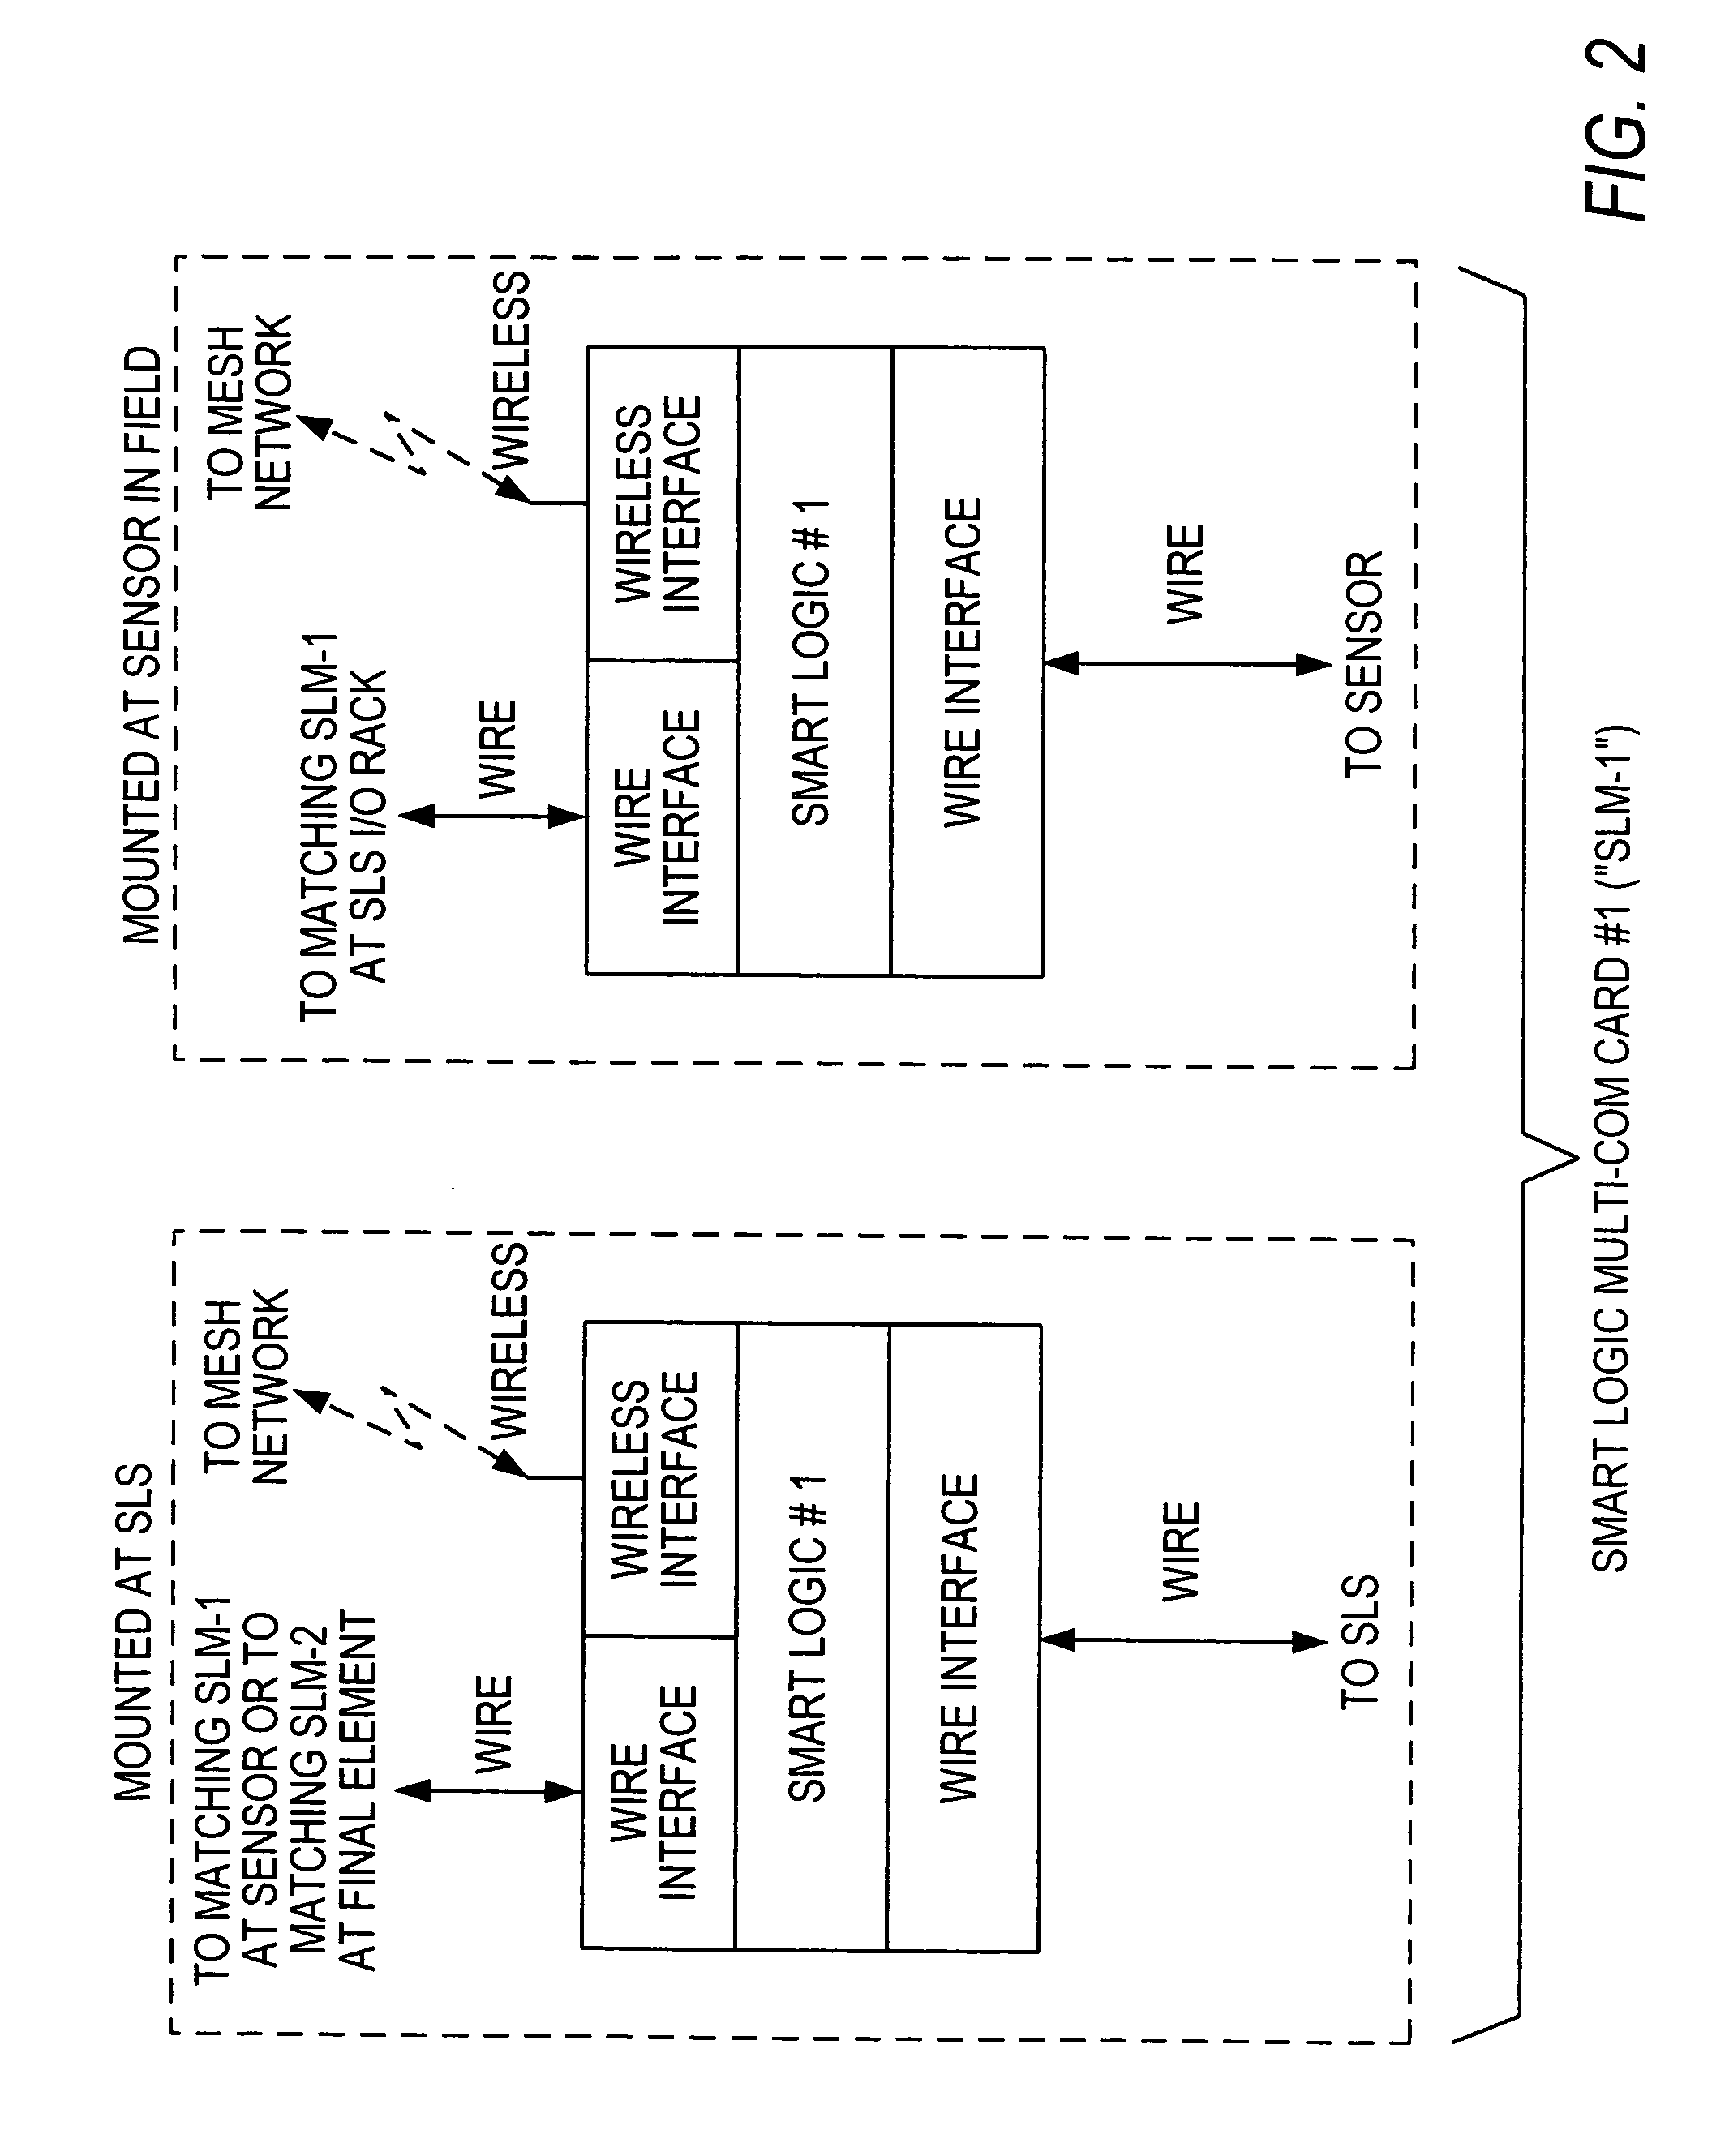 Distributed and adaptive smart logic with multi-communication apparatus for reliable safety system shutdown